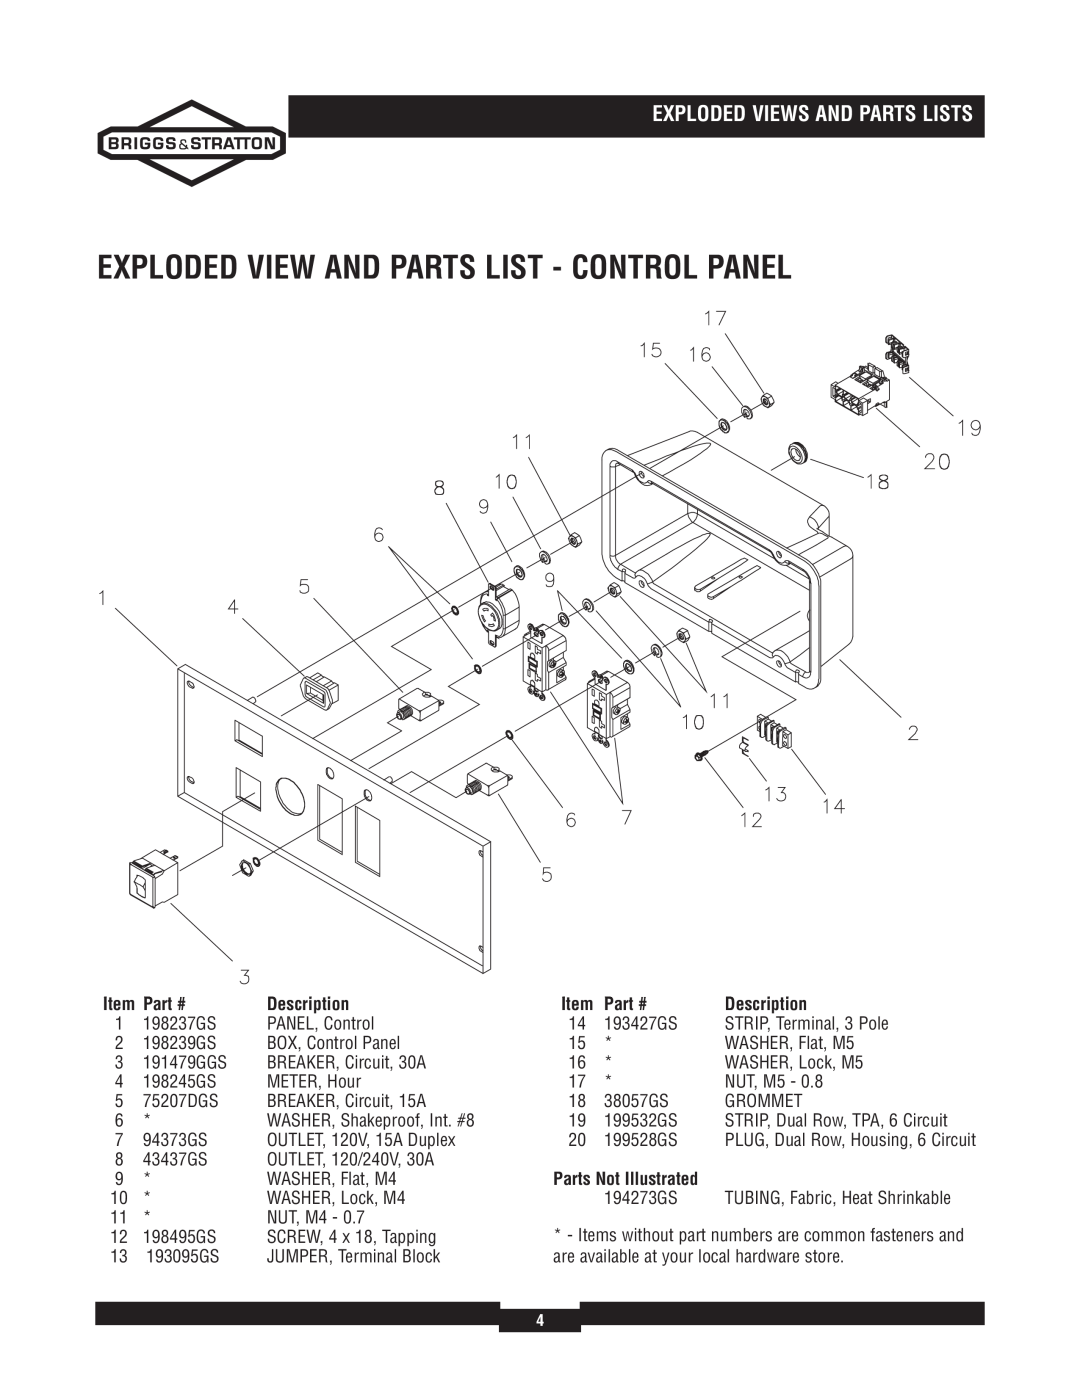 Briggs & Stratton 030244-02 Exploded View And Parts List - Control Panel, Exploded Views And Parts Lists, Description 